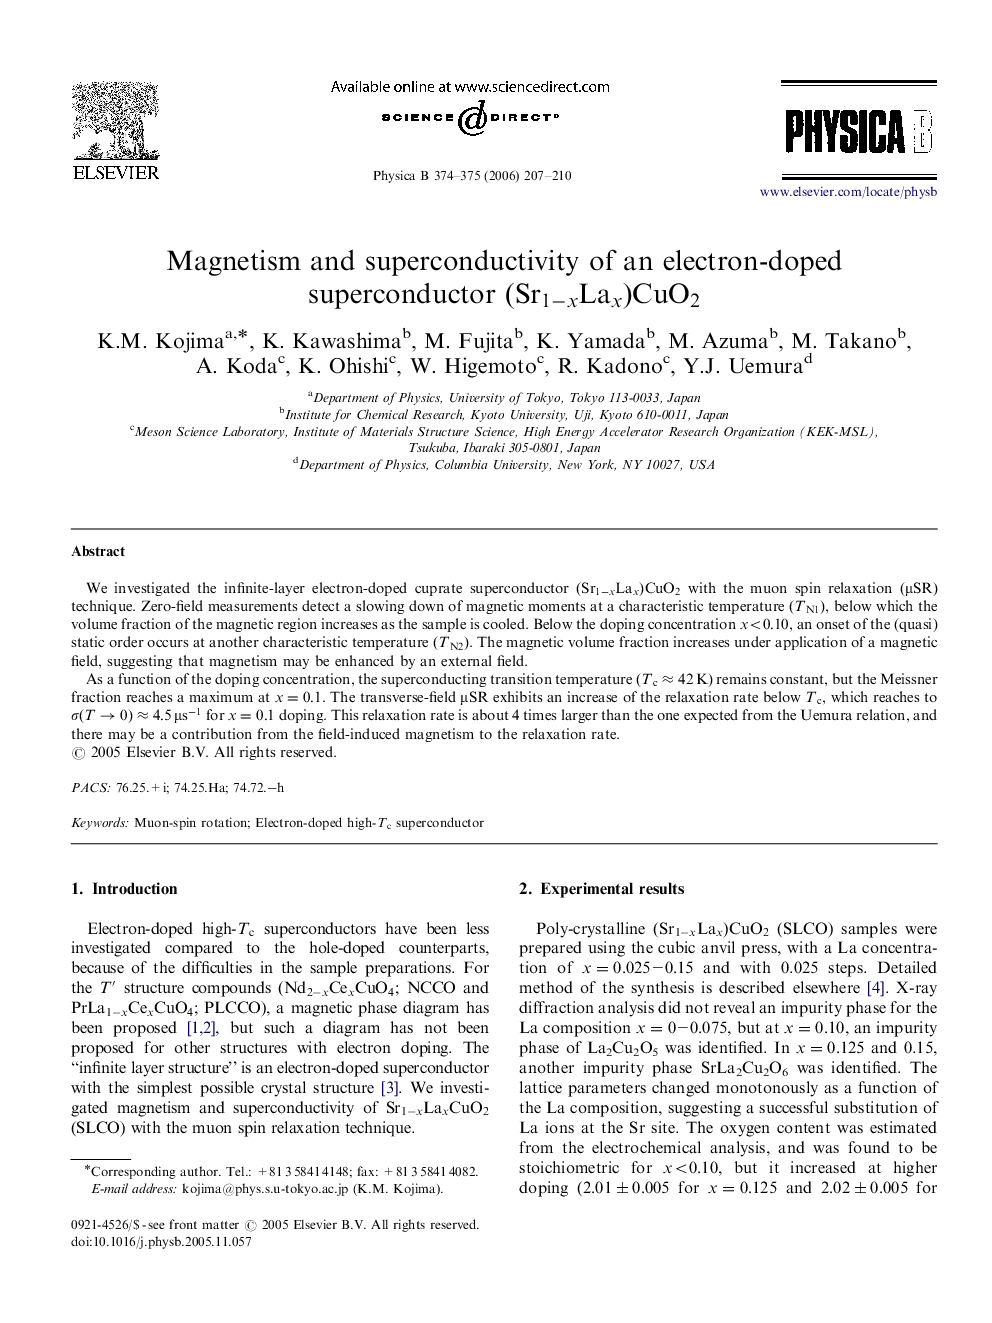 Magnetism and superconductivity of an electron-doped superconductor (Sr1-xLax)CuO2(Sr1-xLax)CuO2